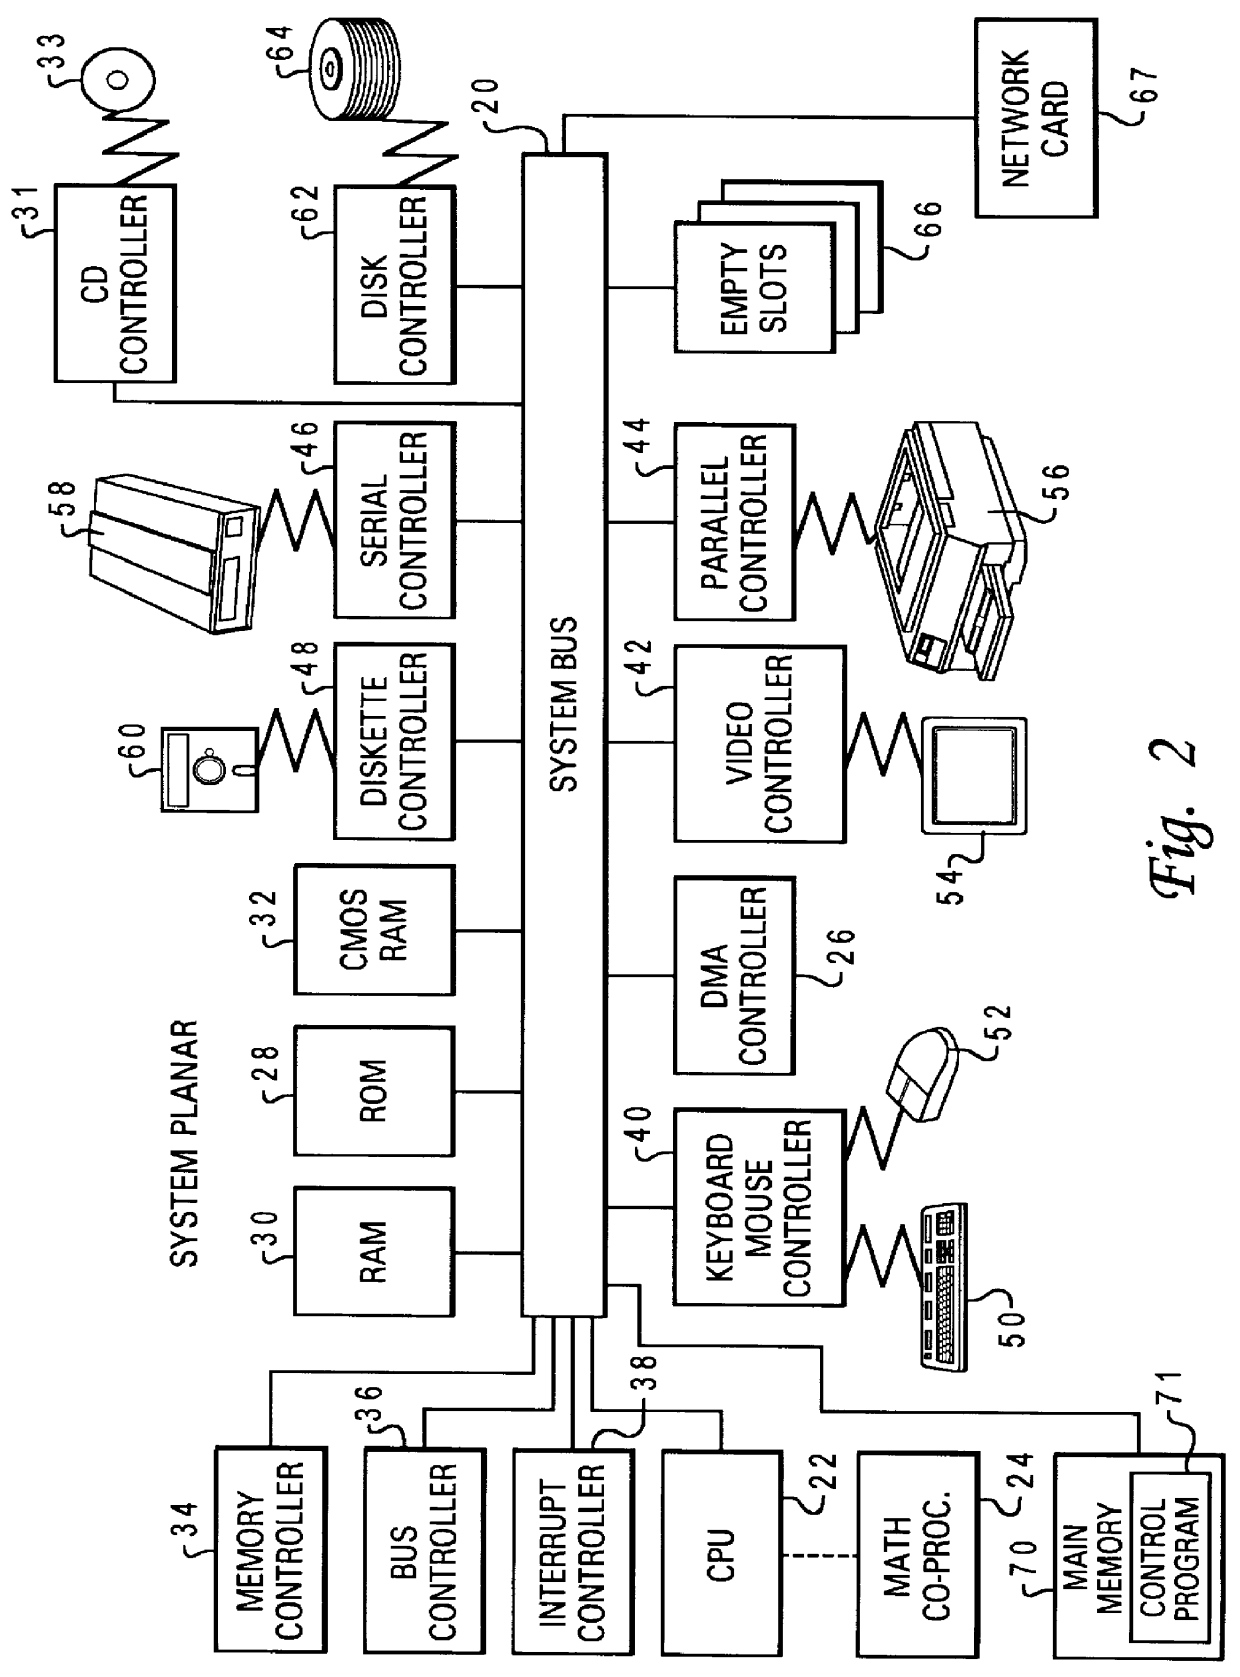 Method and system in a computer network for bundling and launching hypertext files and associated subroutines within archive files